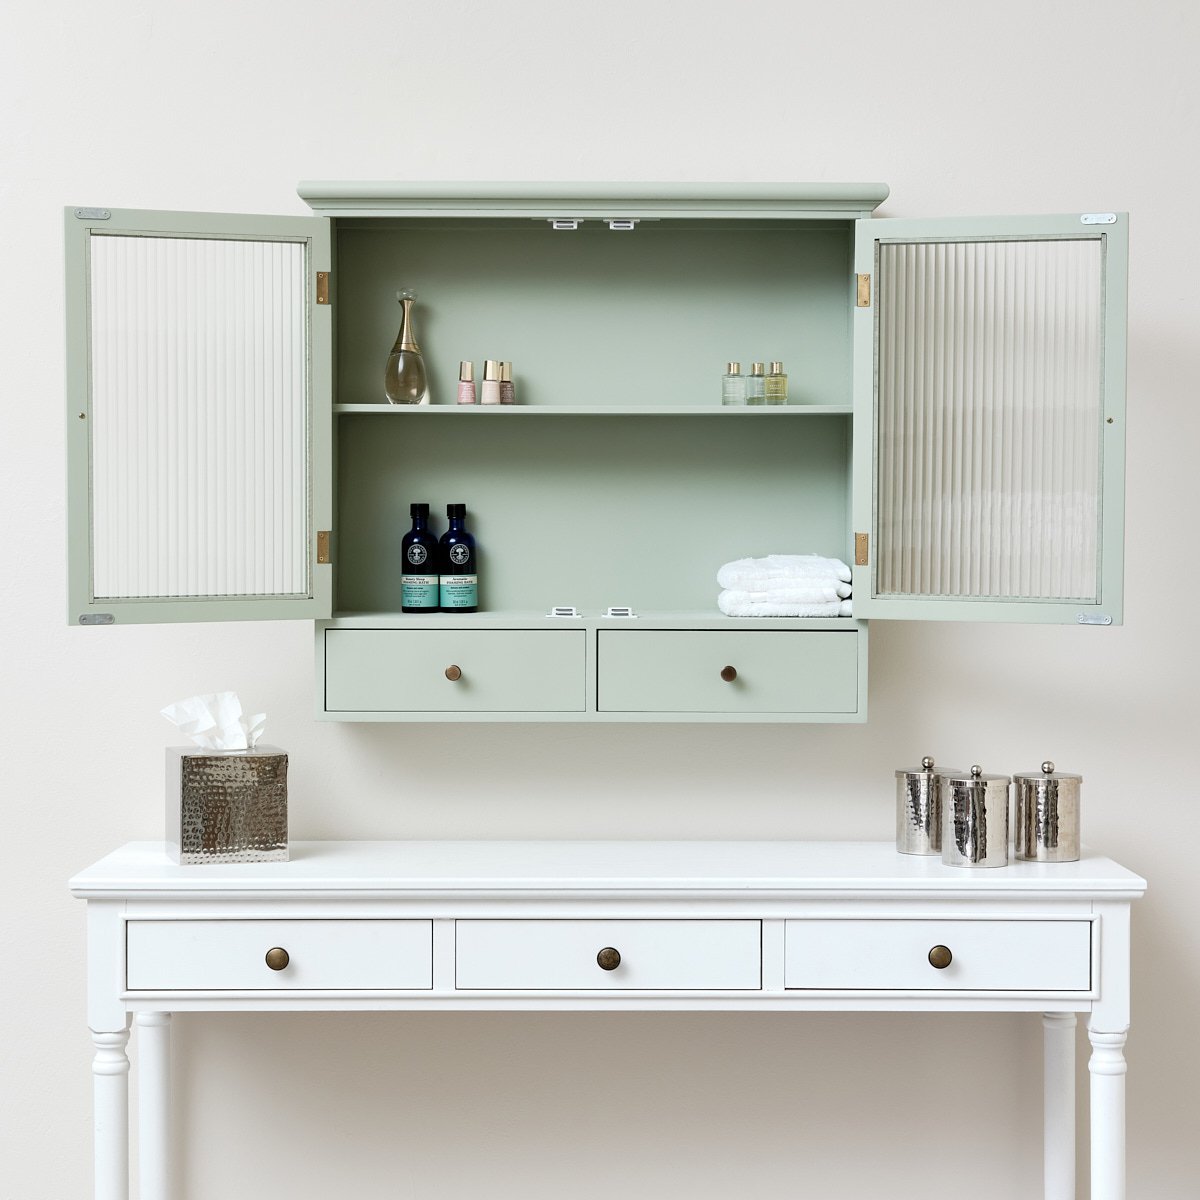 Sage Green Reeded Glass Wall Cabinet with Drawers